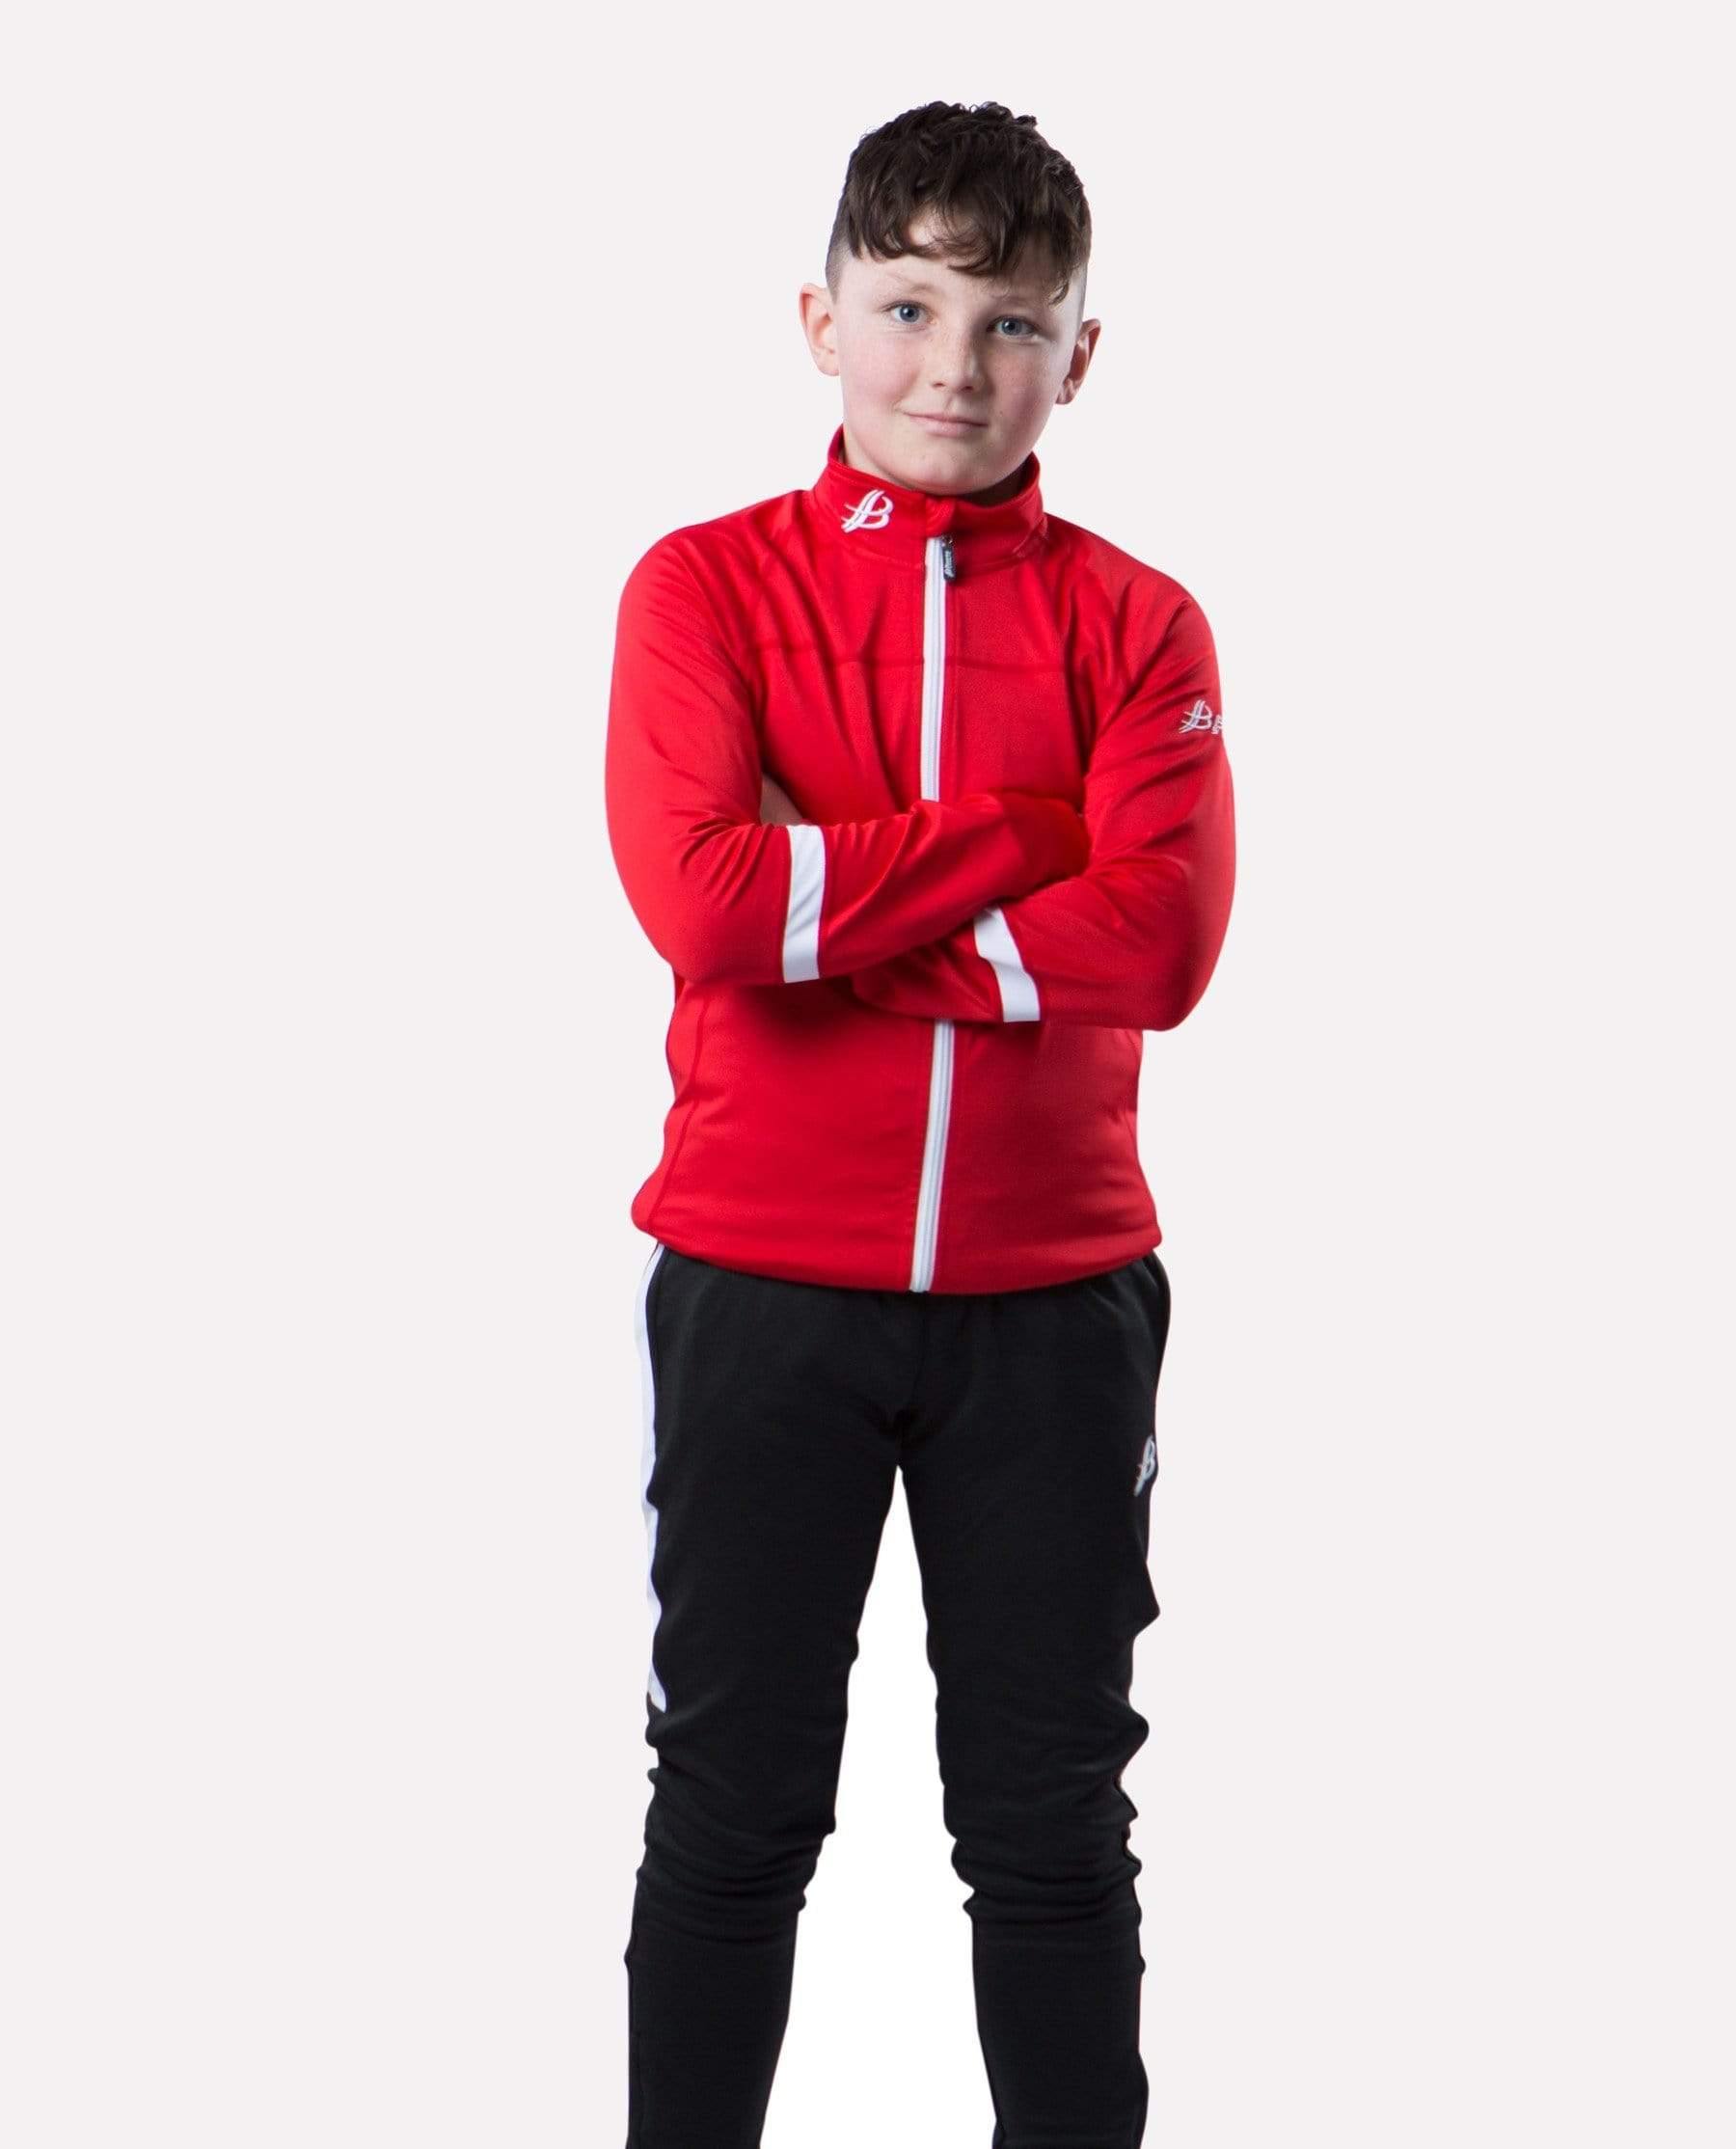 ALPHA Kids Full Zip (Red/White) - Bourke Sports Limited